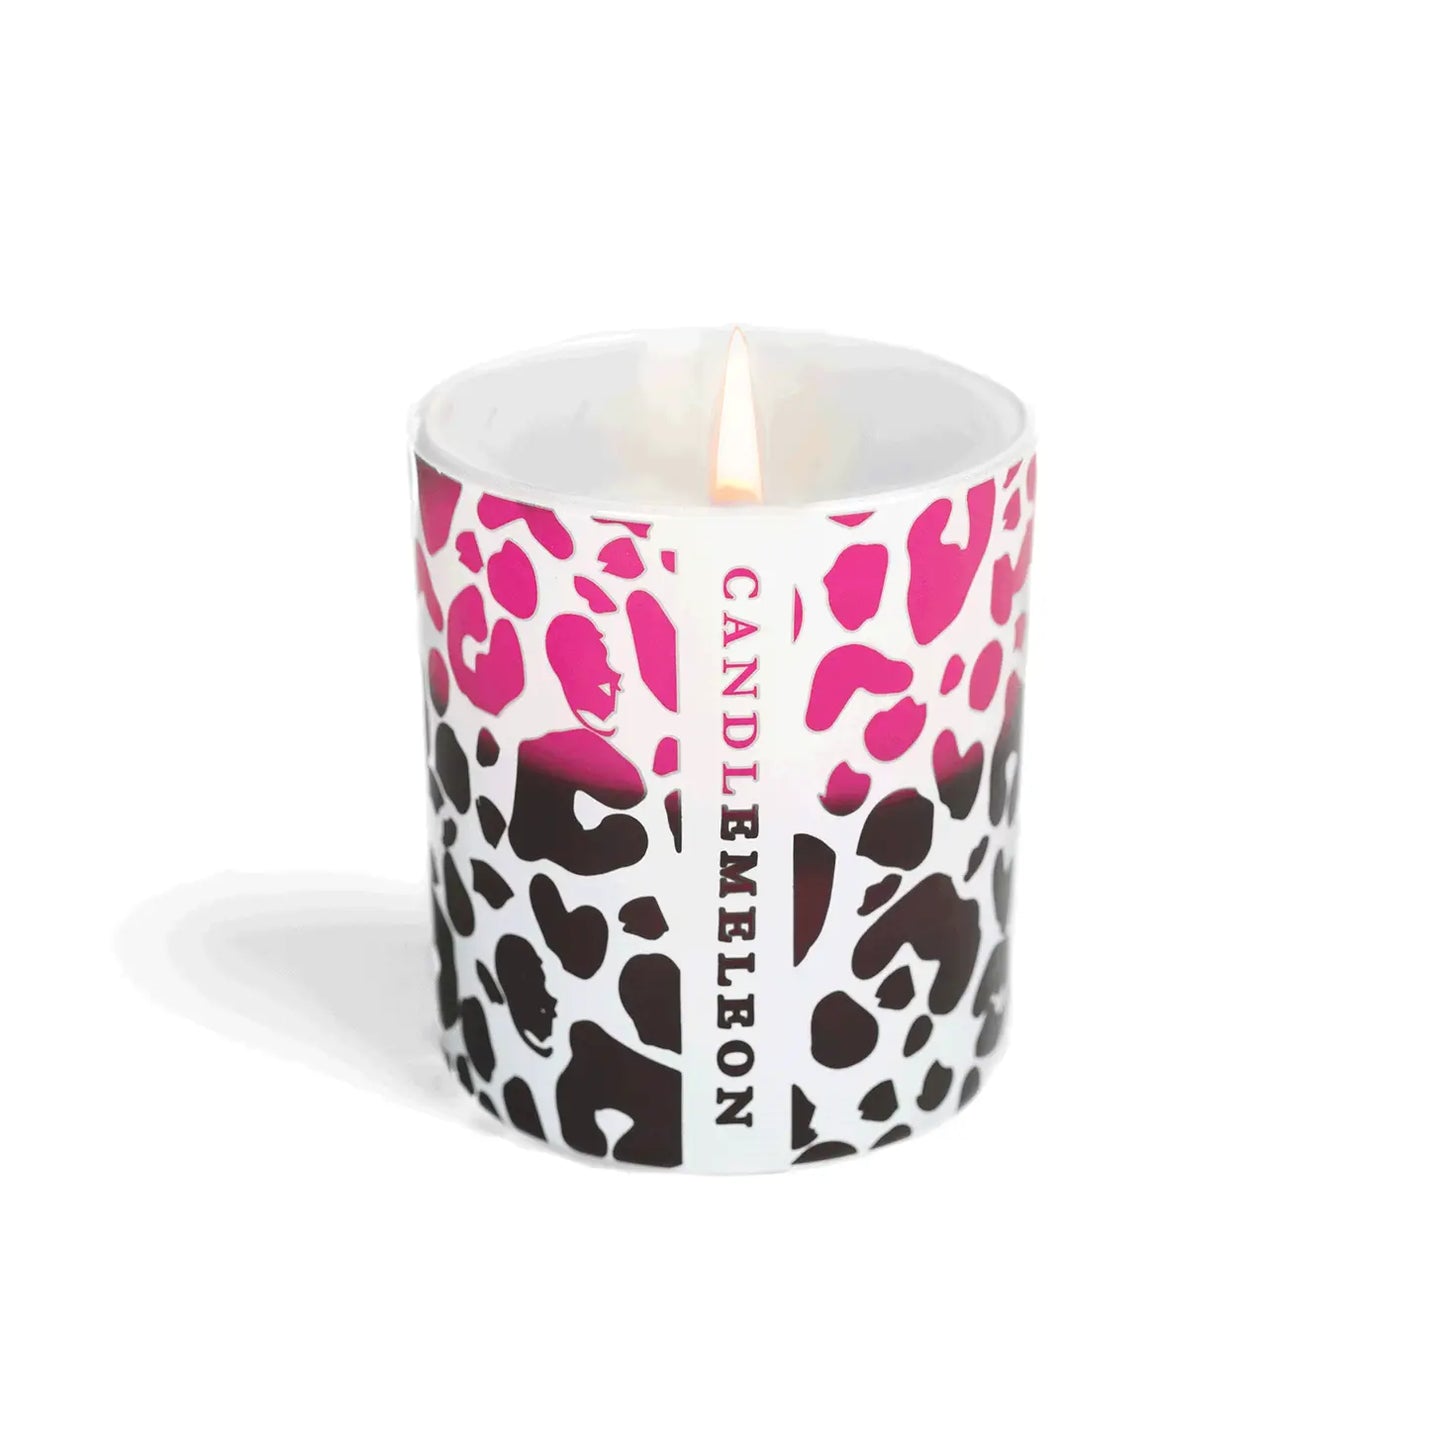 Candlemeleon Pink Leopard Woodenwick Soy Wax Candle at Joetie Home Fragrance. Luxury Handmade Apothecary Soy Candles